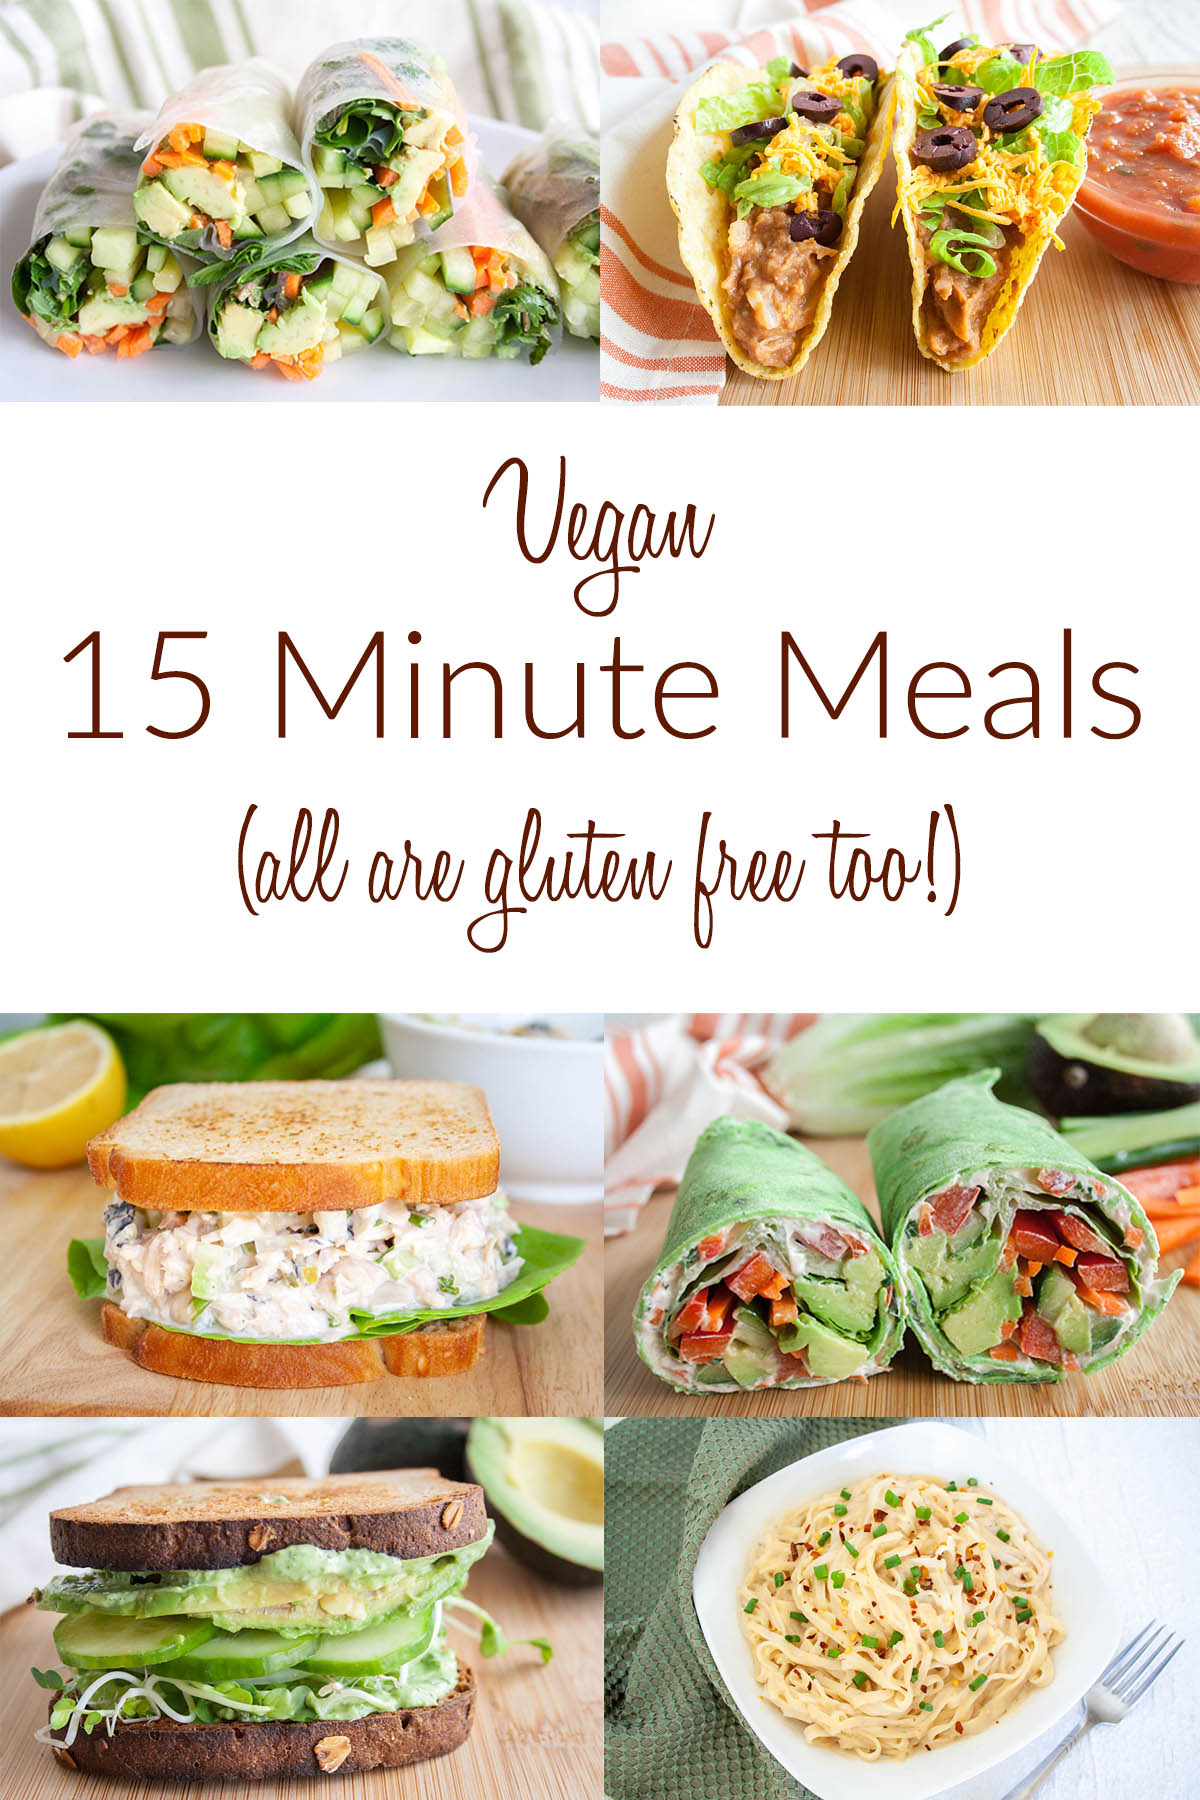 Collage photo with text that reads, "Vegan 15 Minute Meals, all are gluten free too!"